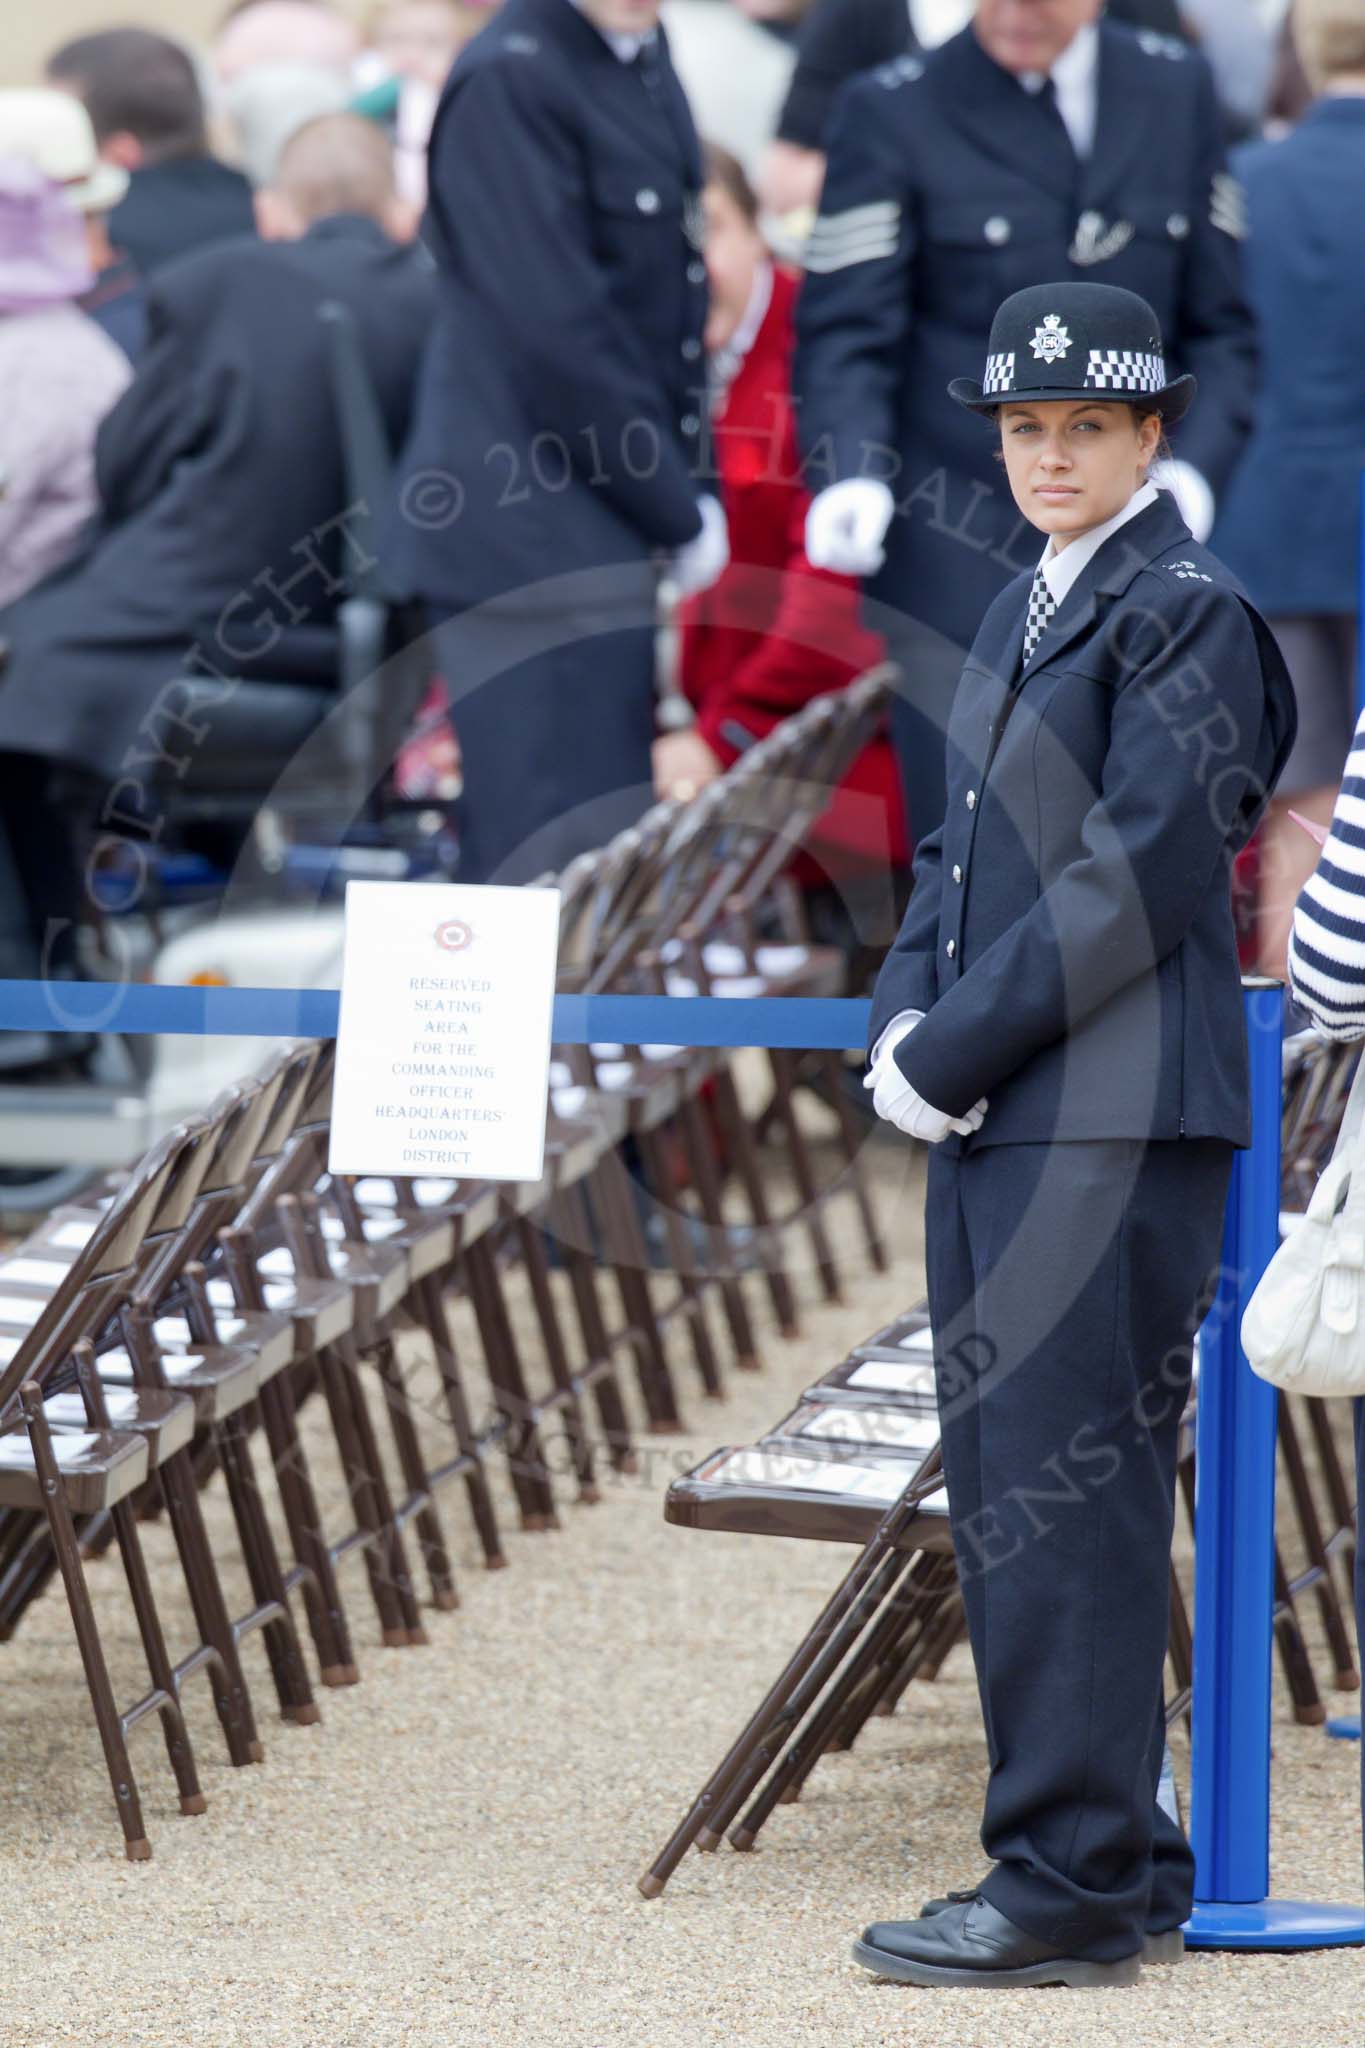 Trooping the Colour 2010: A female Constable of the London Metropolitan Police Service (MPS) is guarding a reserved seating area, the signpost reads 'Reserved Seating Area for the Commanding Officer Headquarters London District'..
Horse Guards Parade, Westminster,
London SW1,
Greater London,
United Kingdom,
on 12 June 2010 at 10:11, image #3